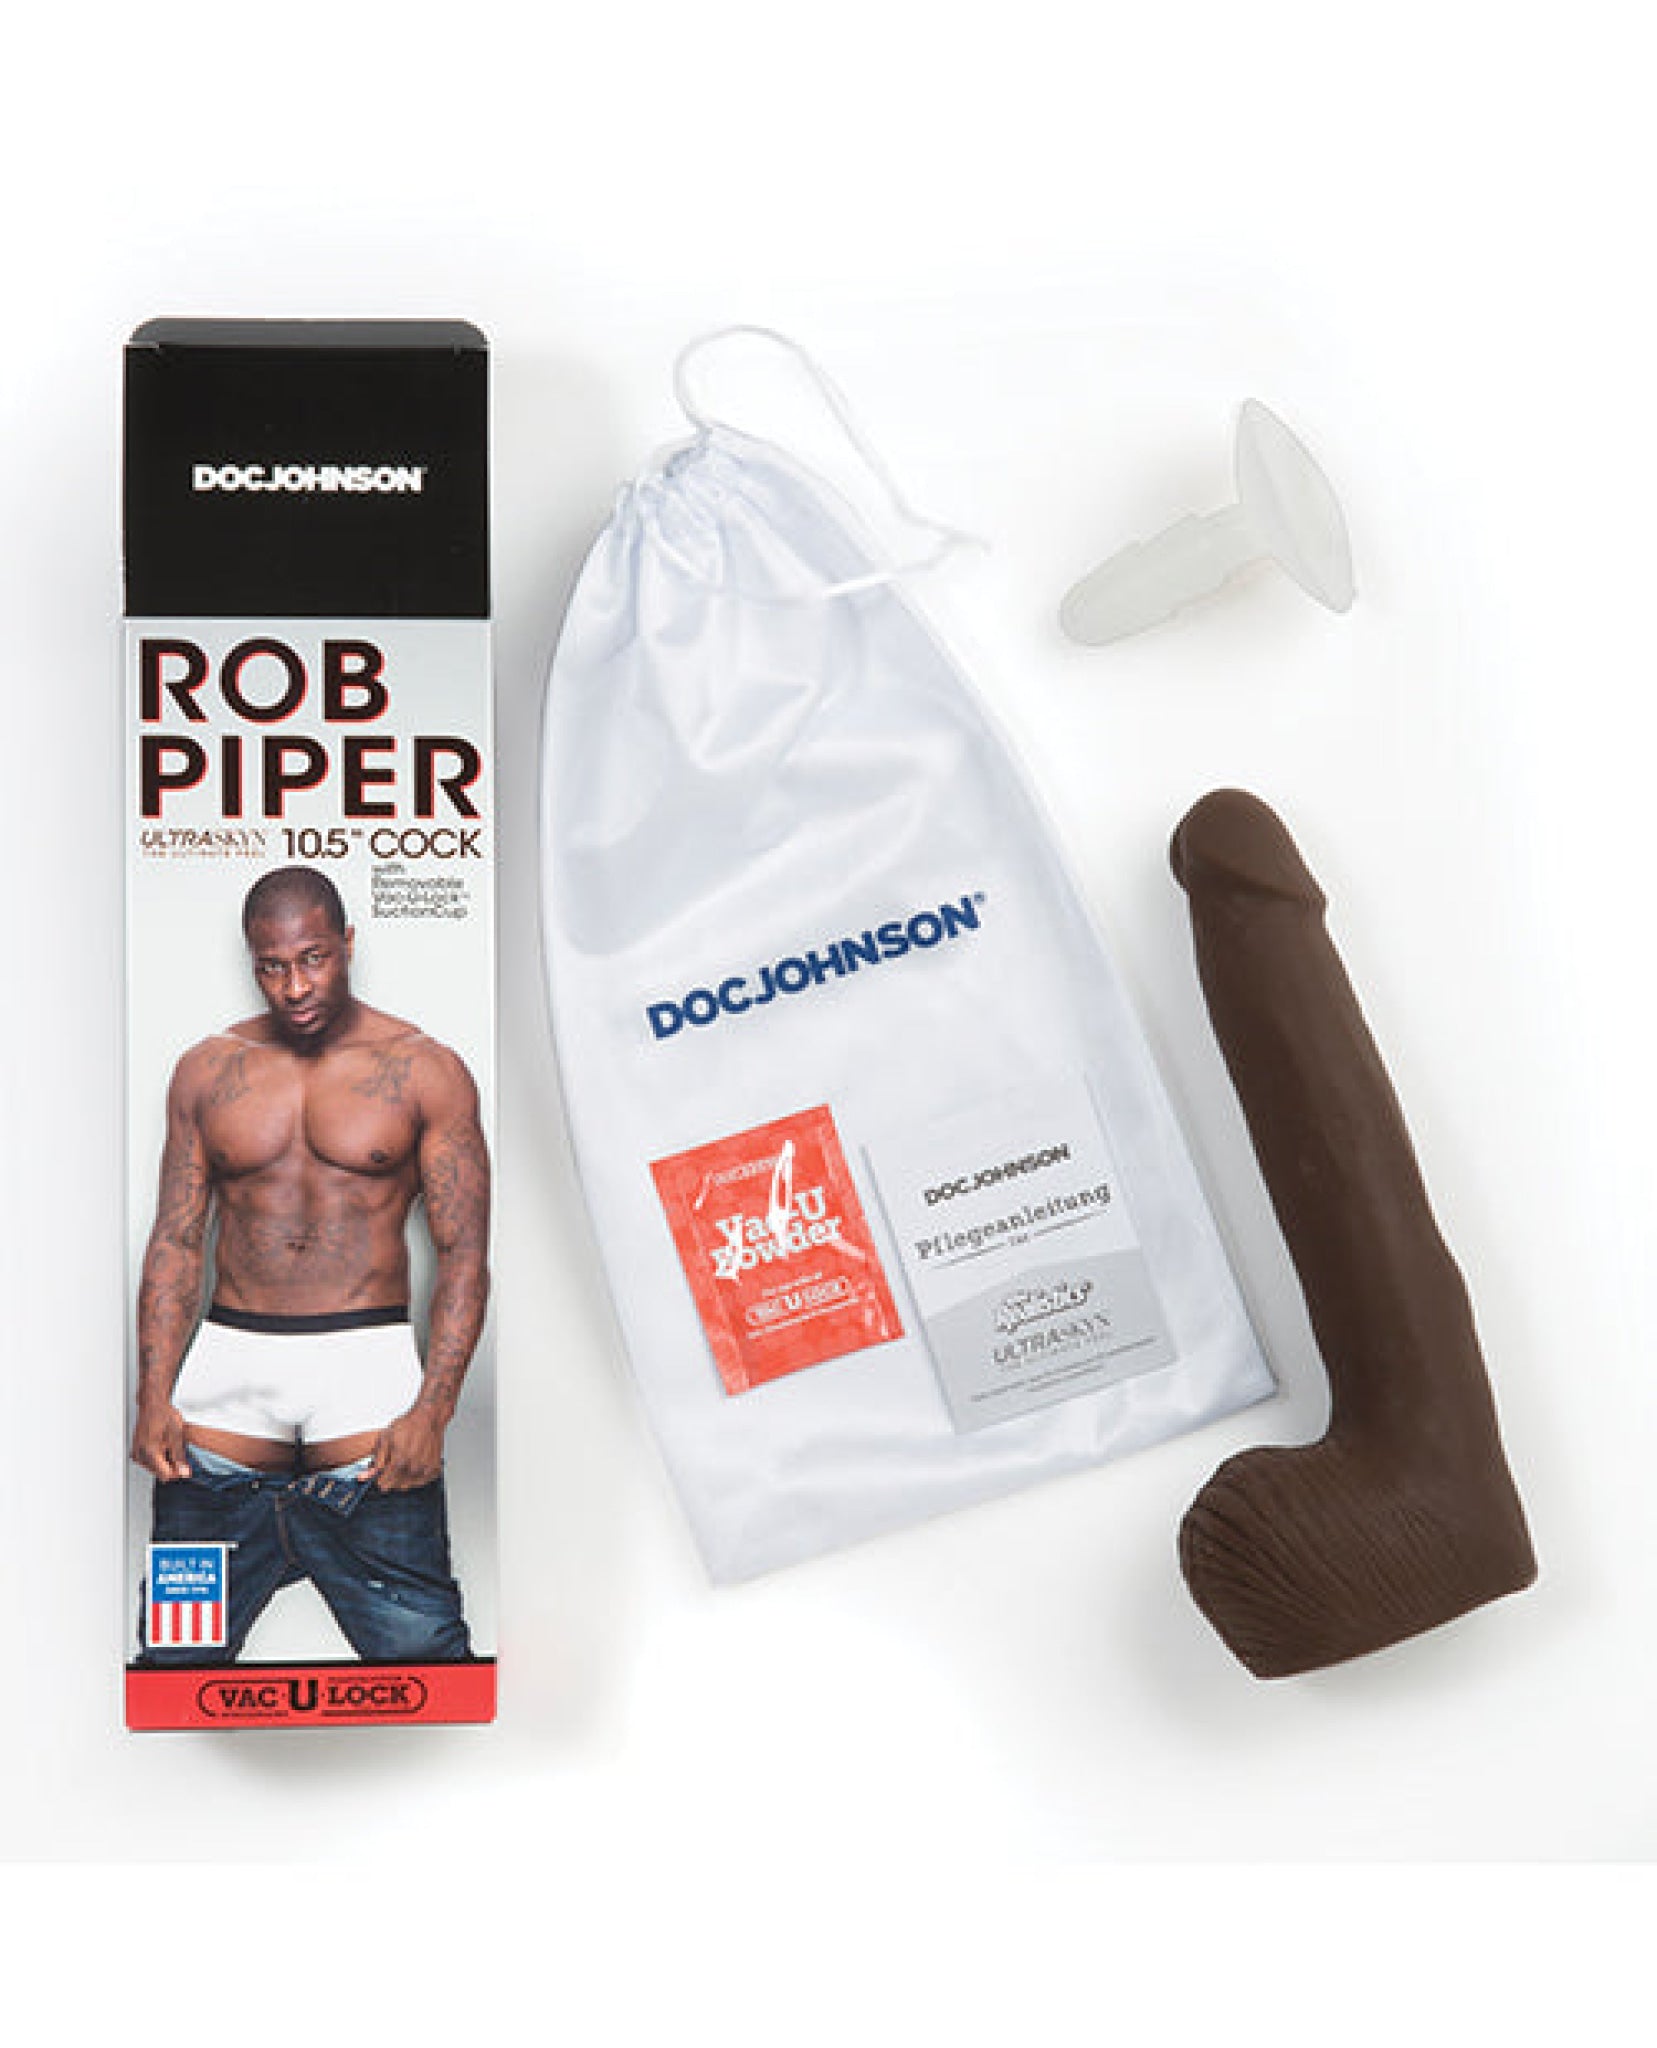 Rob Piper Cock W-balls & Suction Cup - Chocolate Doc Johnson